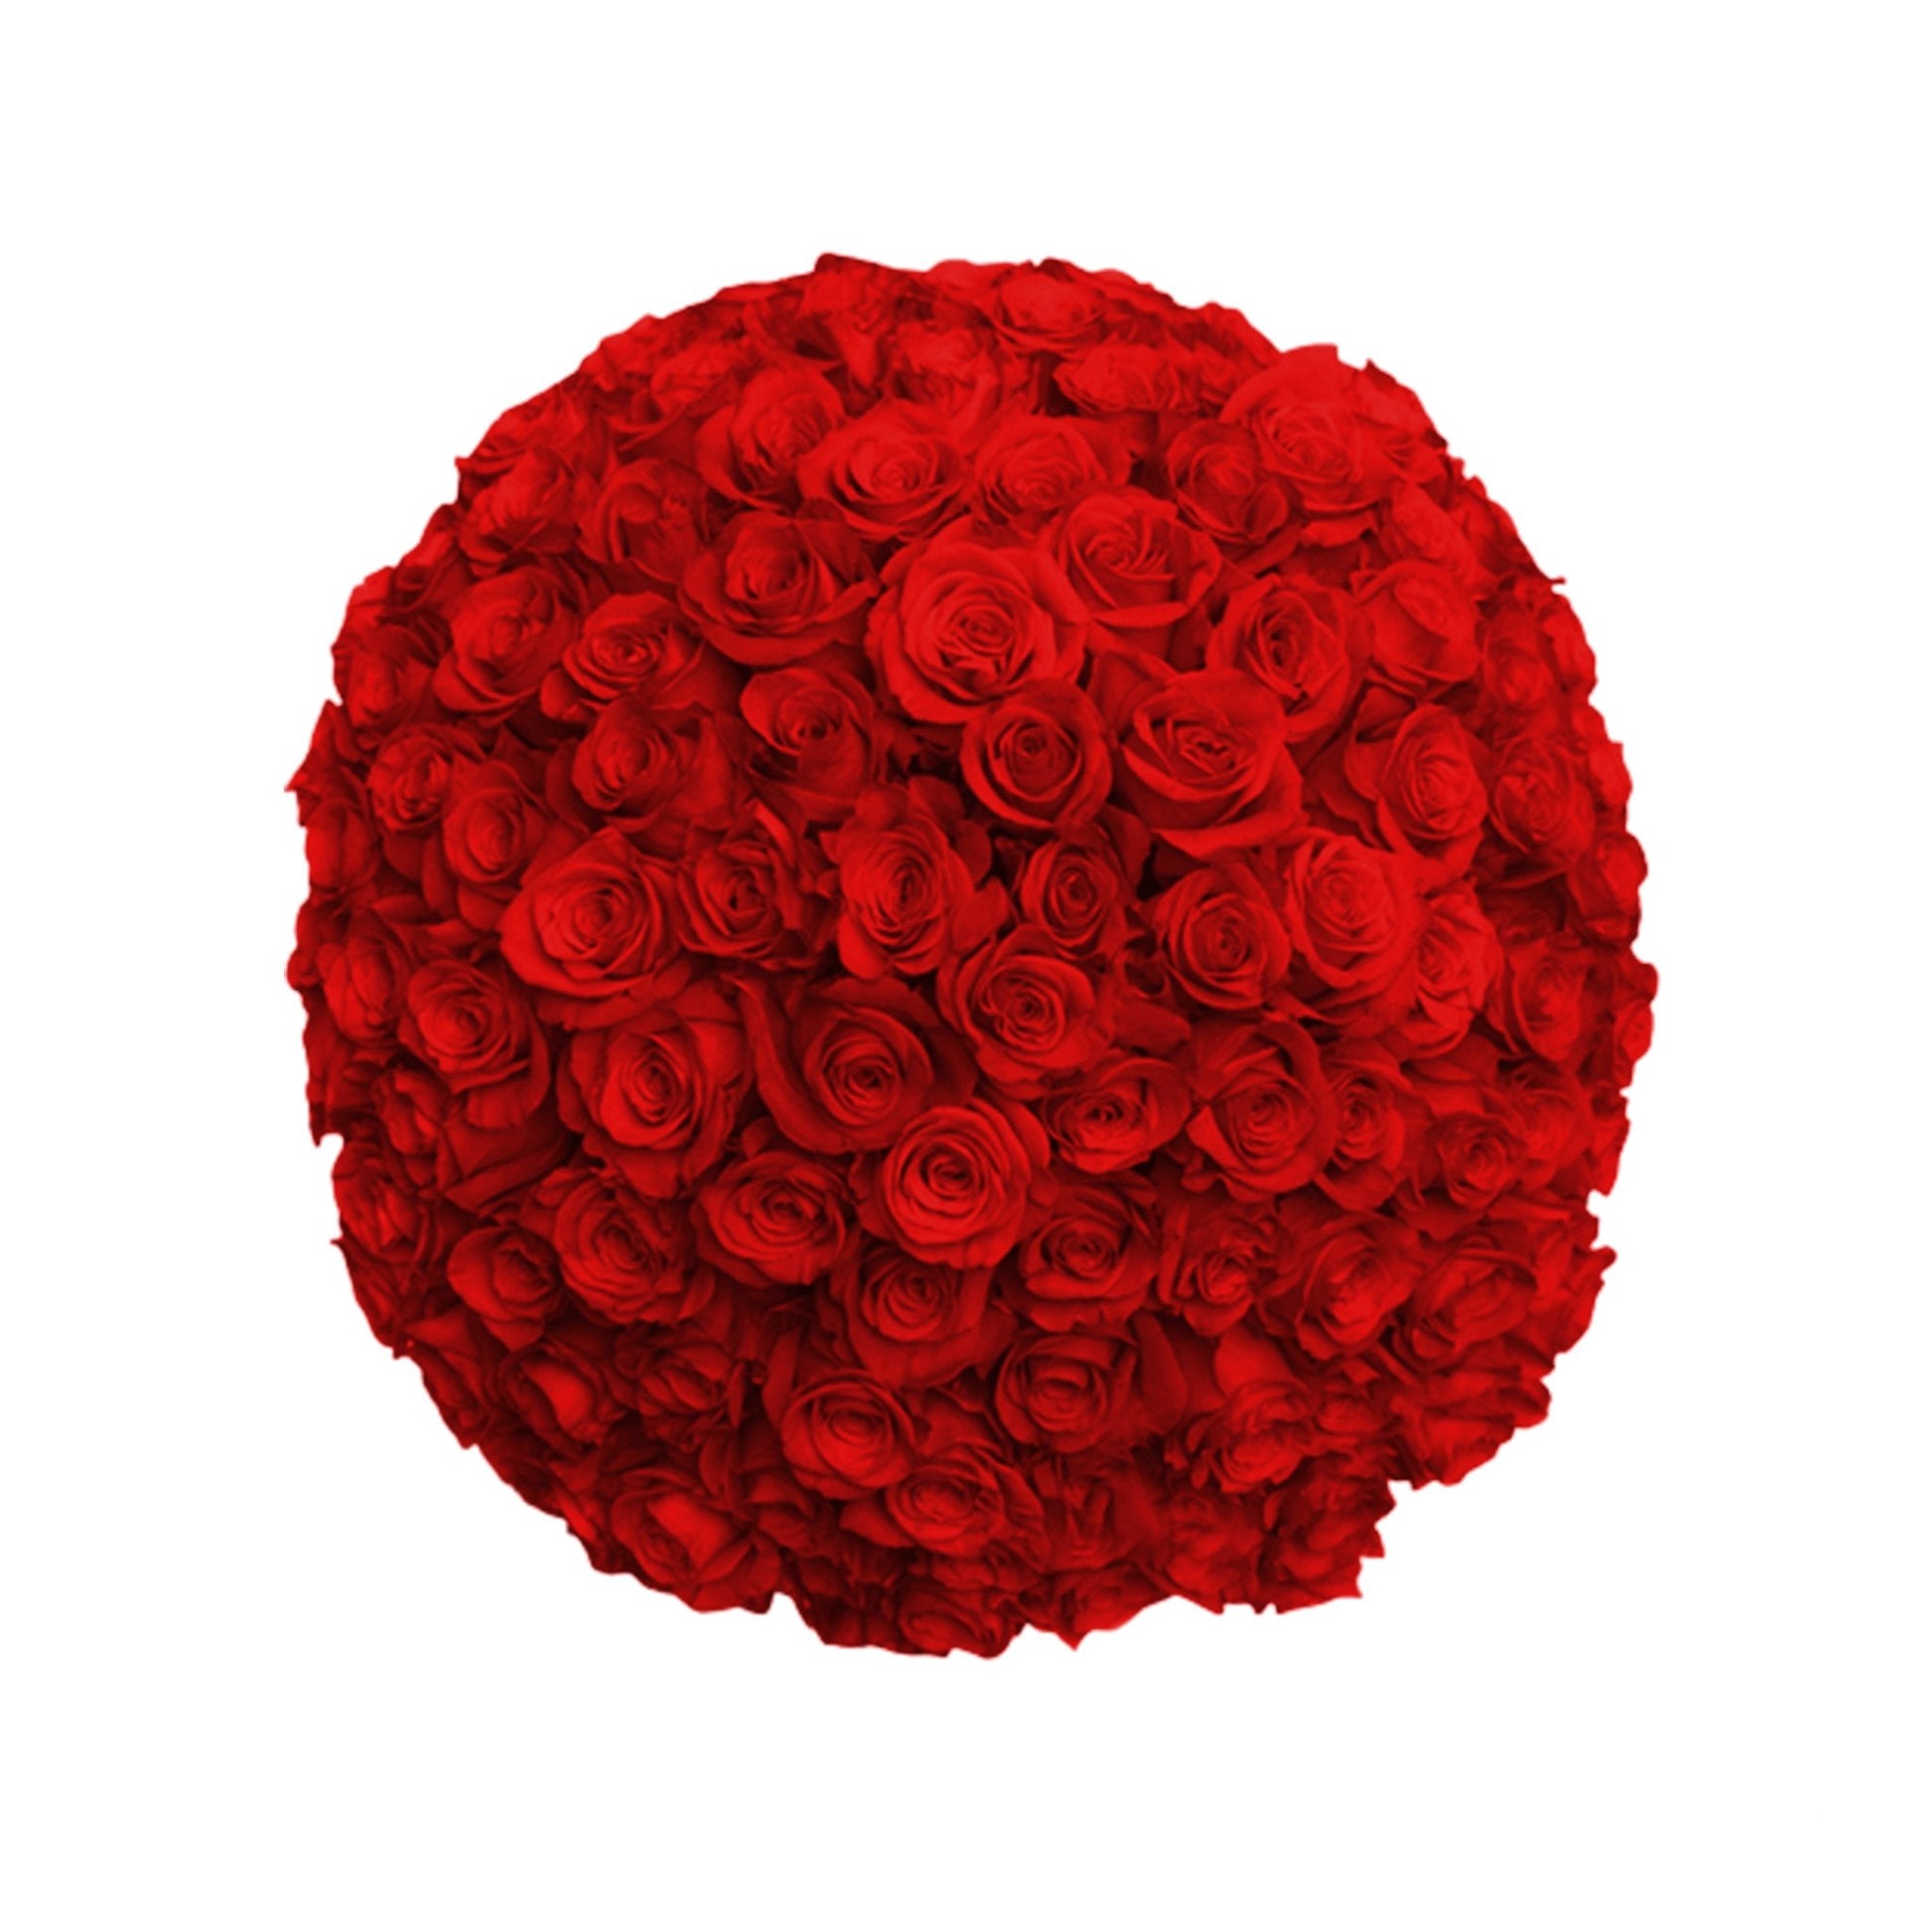 Fresh Roses in a Vase | 100 Red Roses - Fresh Cut Flowers - Queens Flower Delivery